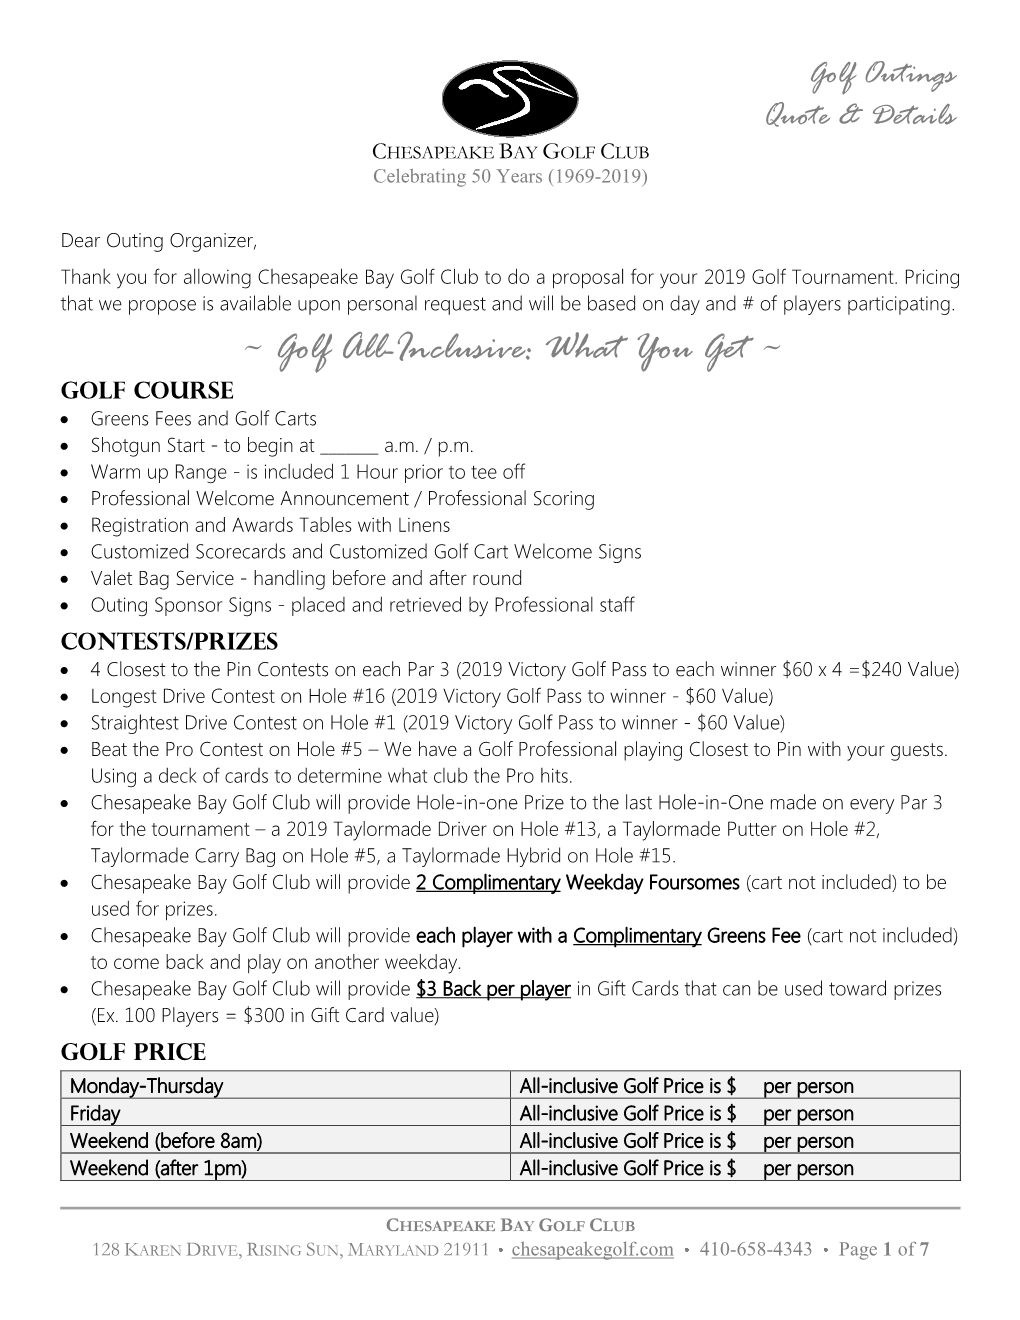 Golf Outing Packages